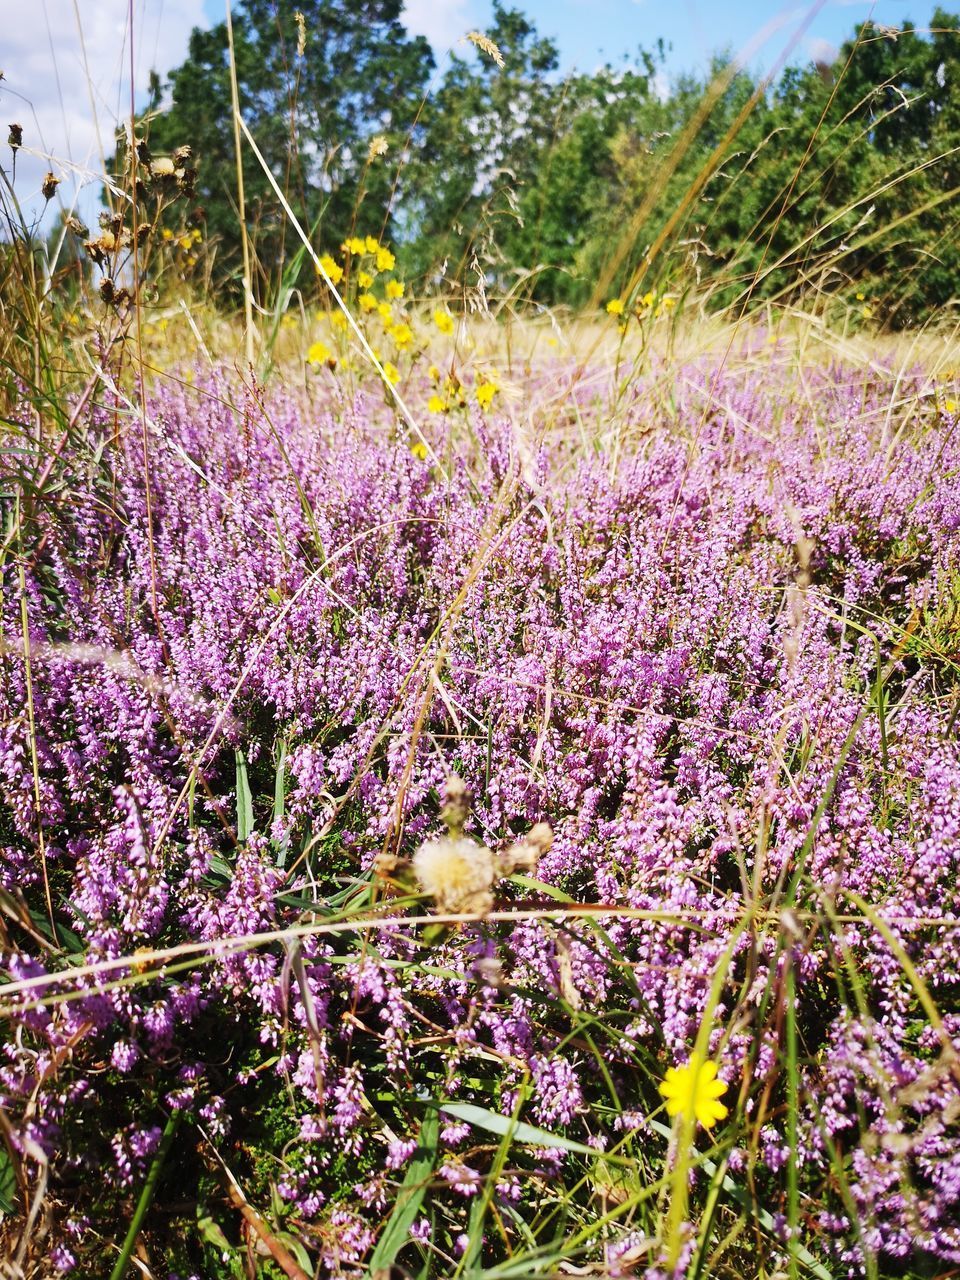 CLOSE-UP OF PURPLE FLOWERING PLANTS BY TREES ON FIELD